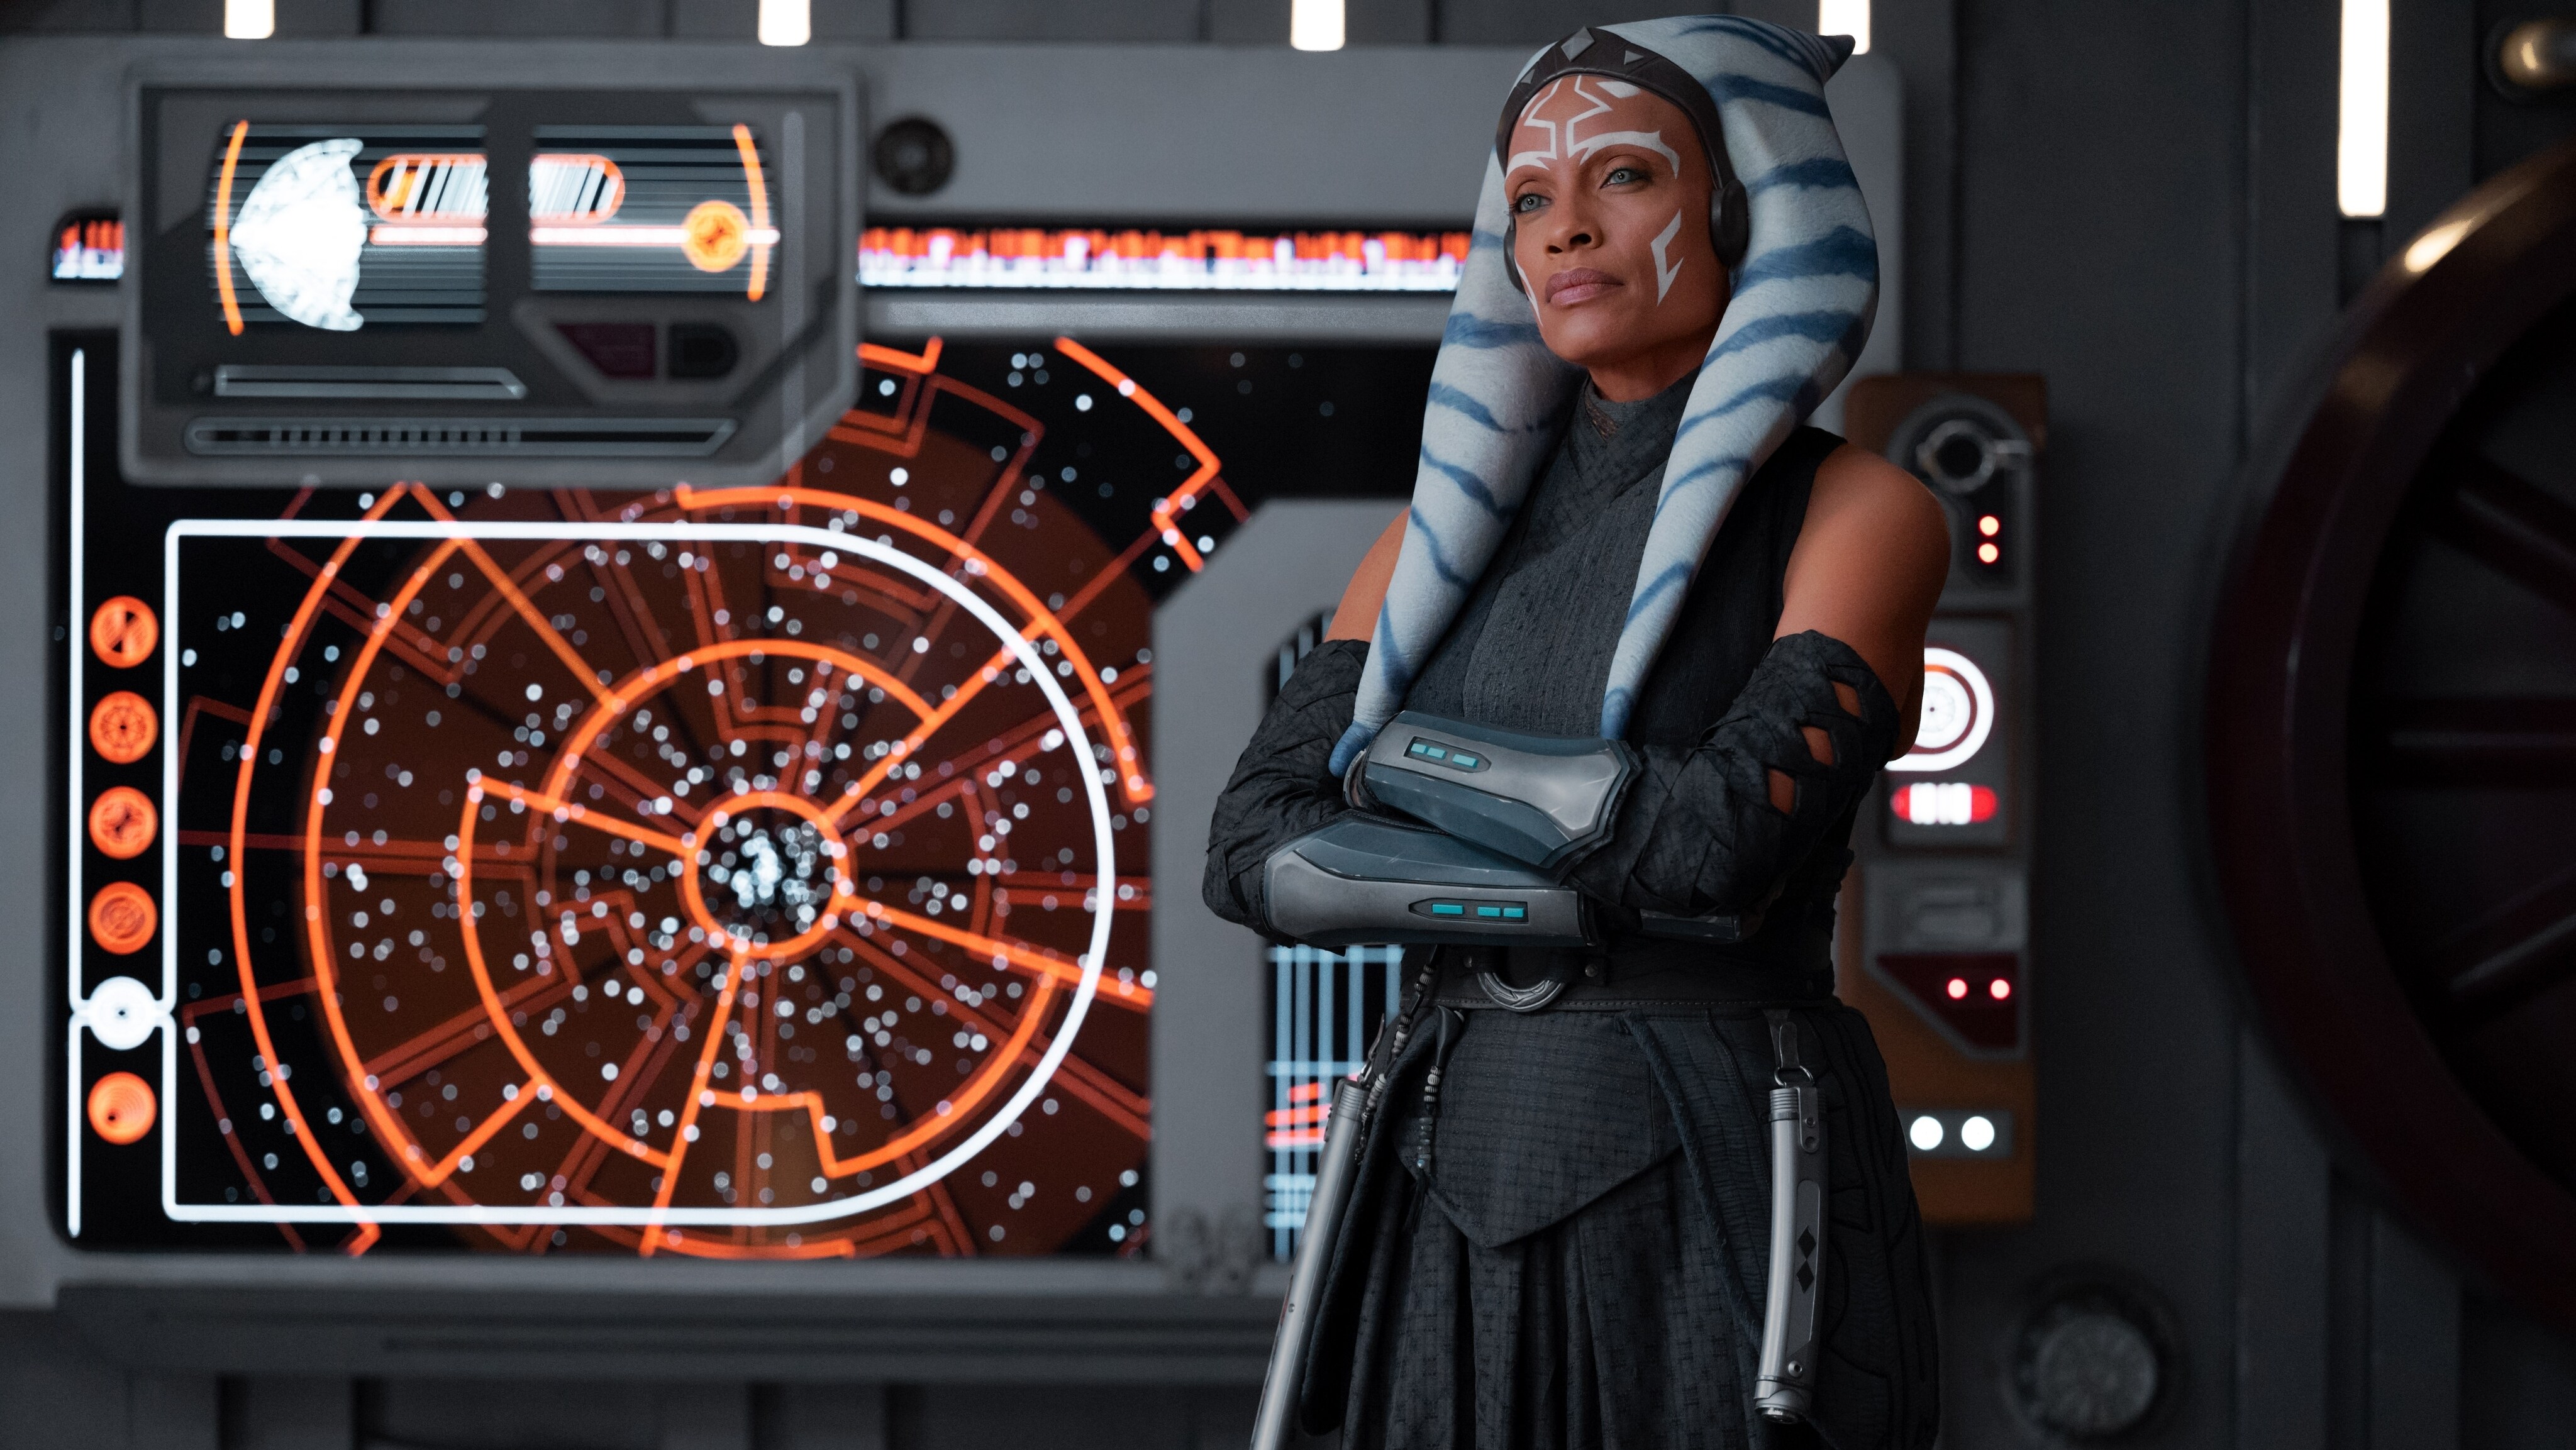 Disney+ Celebrates “Star Wars: Ahsoka” Premiere With New Featurette     Special Access “Ahsoka” Merchandise Now Available For U.S. Disney+ Subscribers On shopDisney